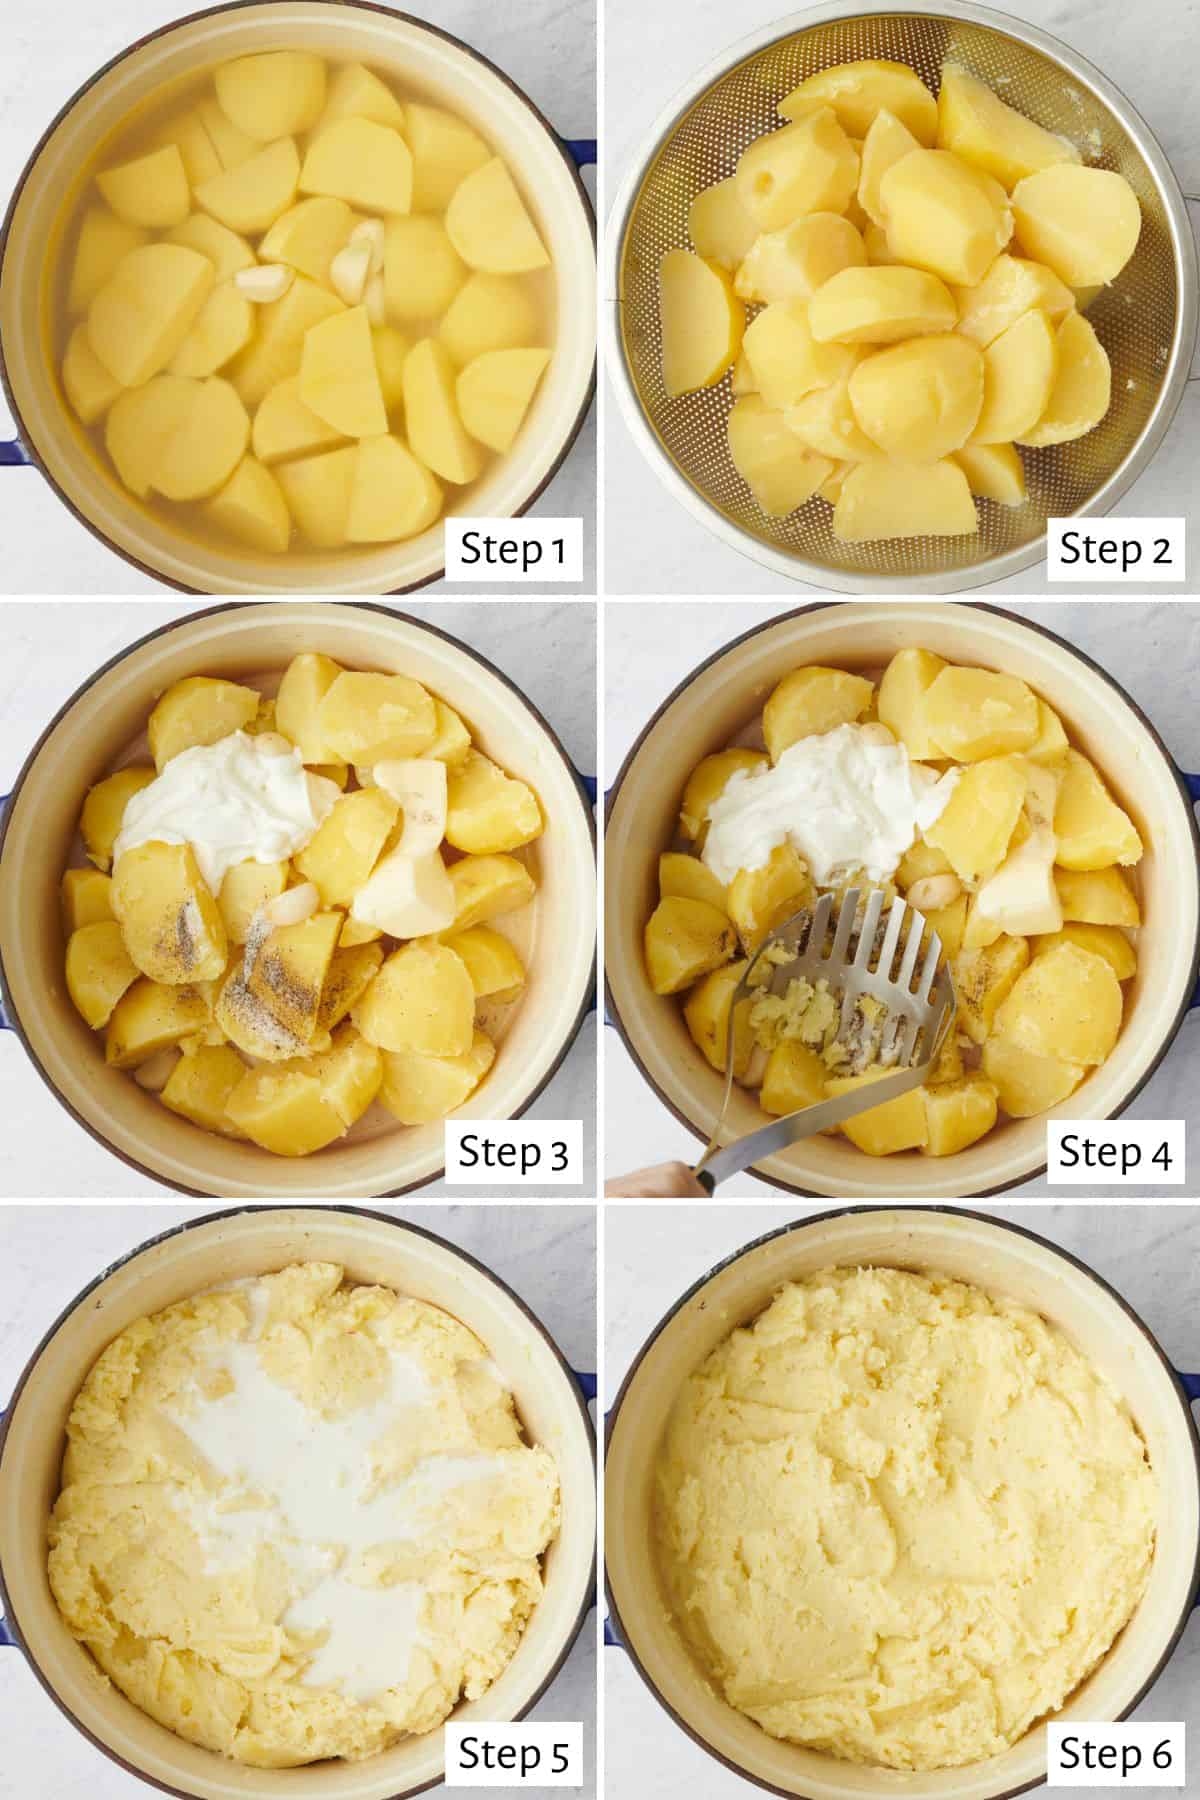 6 image collage making recipe: 1- potatoes in a pot with water, 2- in a colander, 3- strained potatoes added back to pot with yogurt, garlic and spices, 4- potato masher mashing potatoes and add ins, 5- after mashing with milk added, 6- fully combined mashed potatoes.